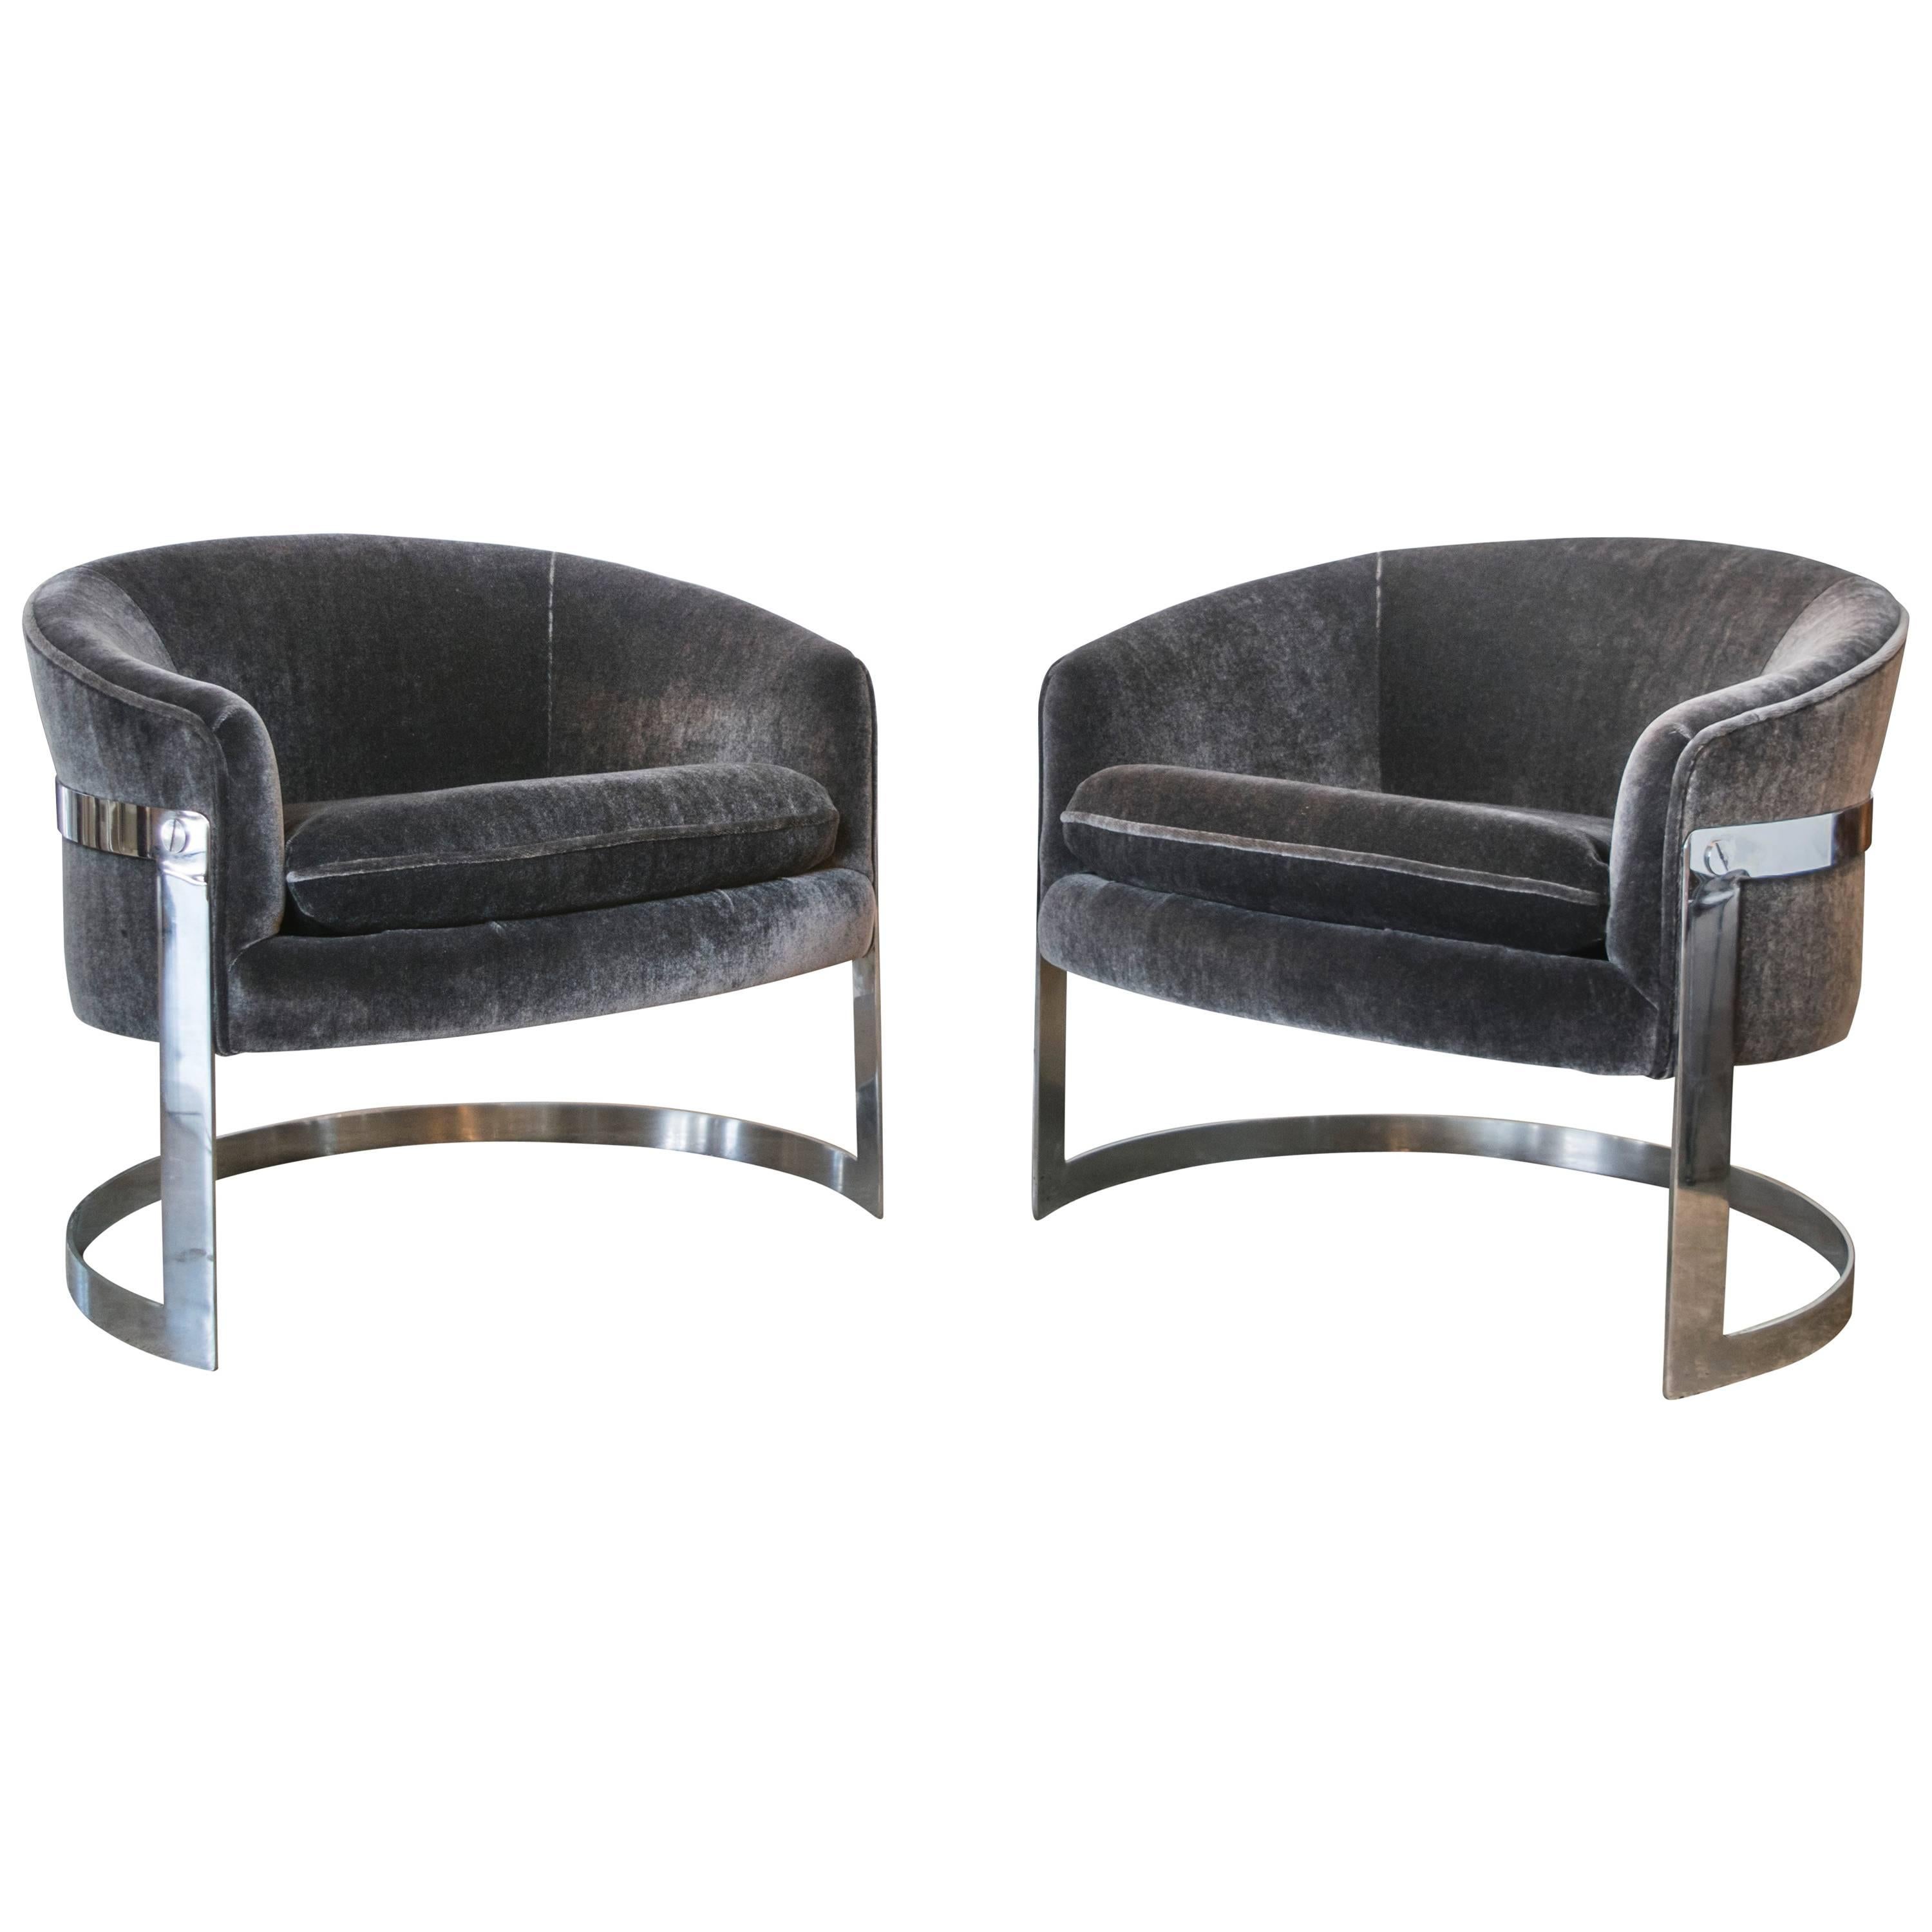 Milo Baughman Chrome Cantilevered Club Chairs in Charcoal Mohair